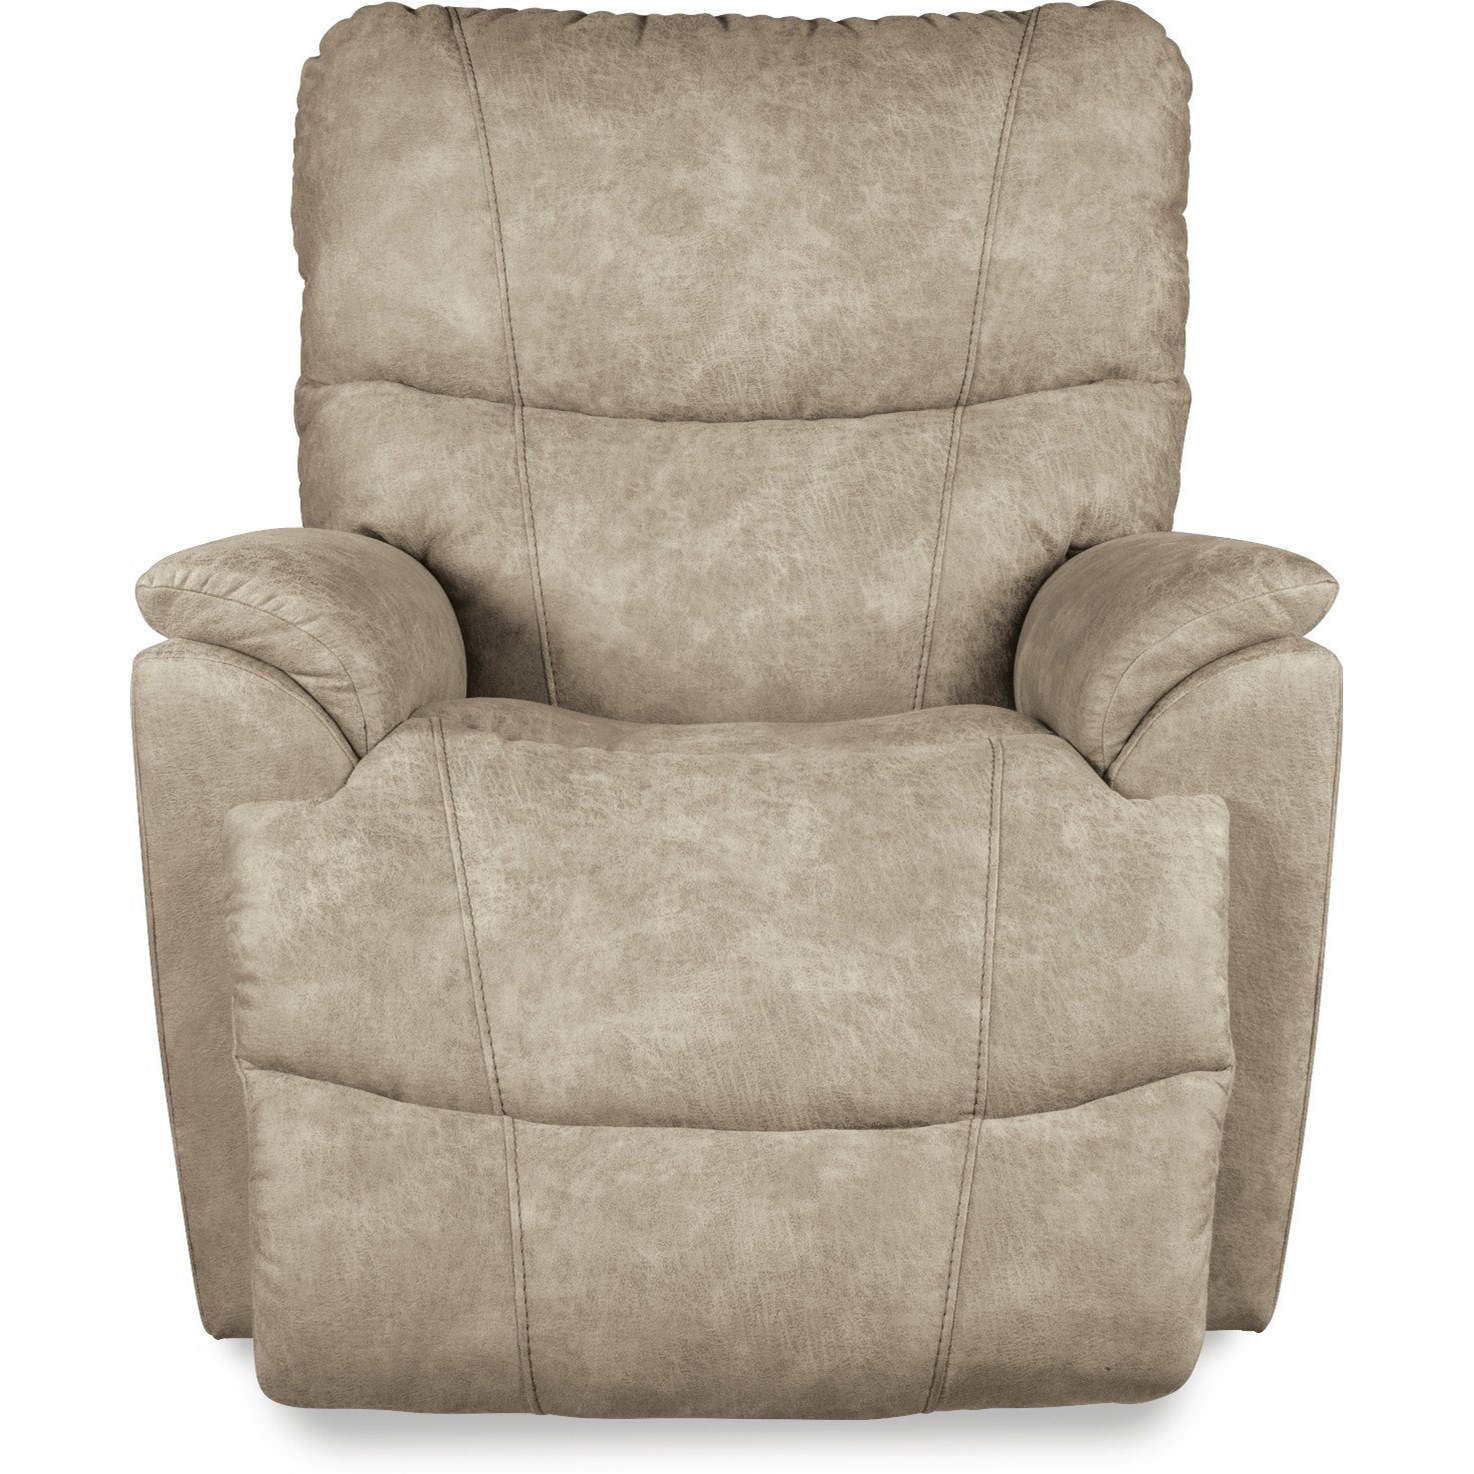 king size lazy boy recliners